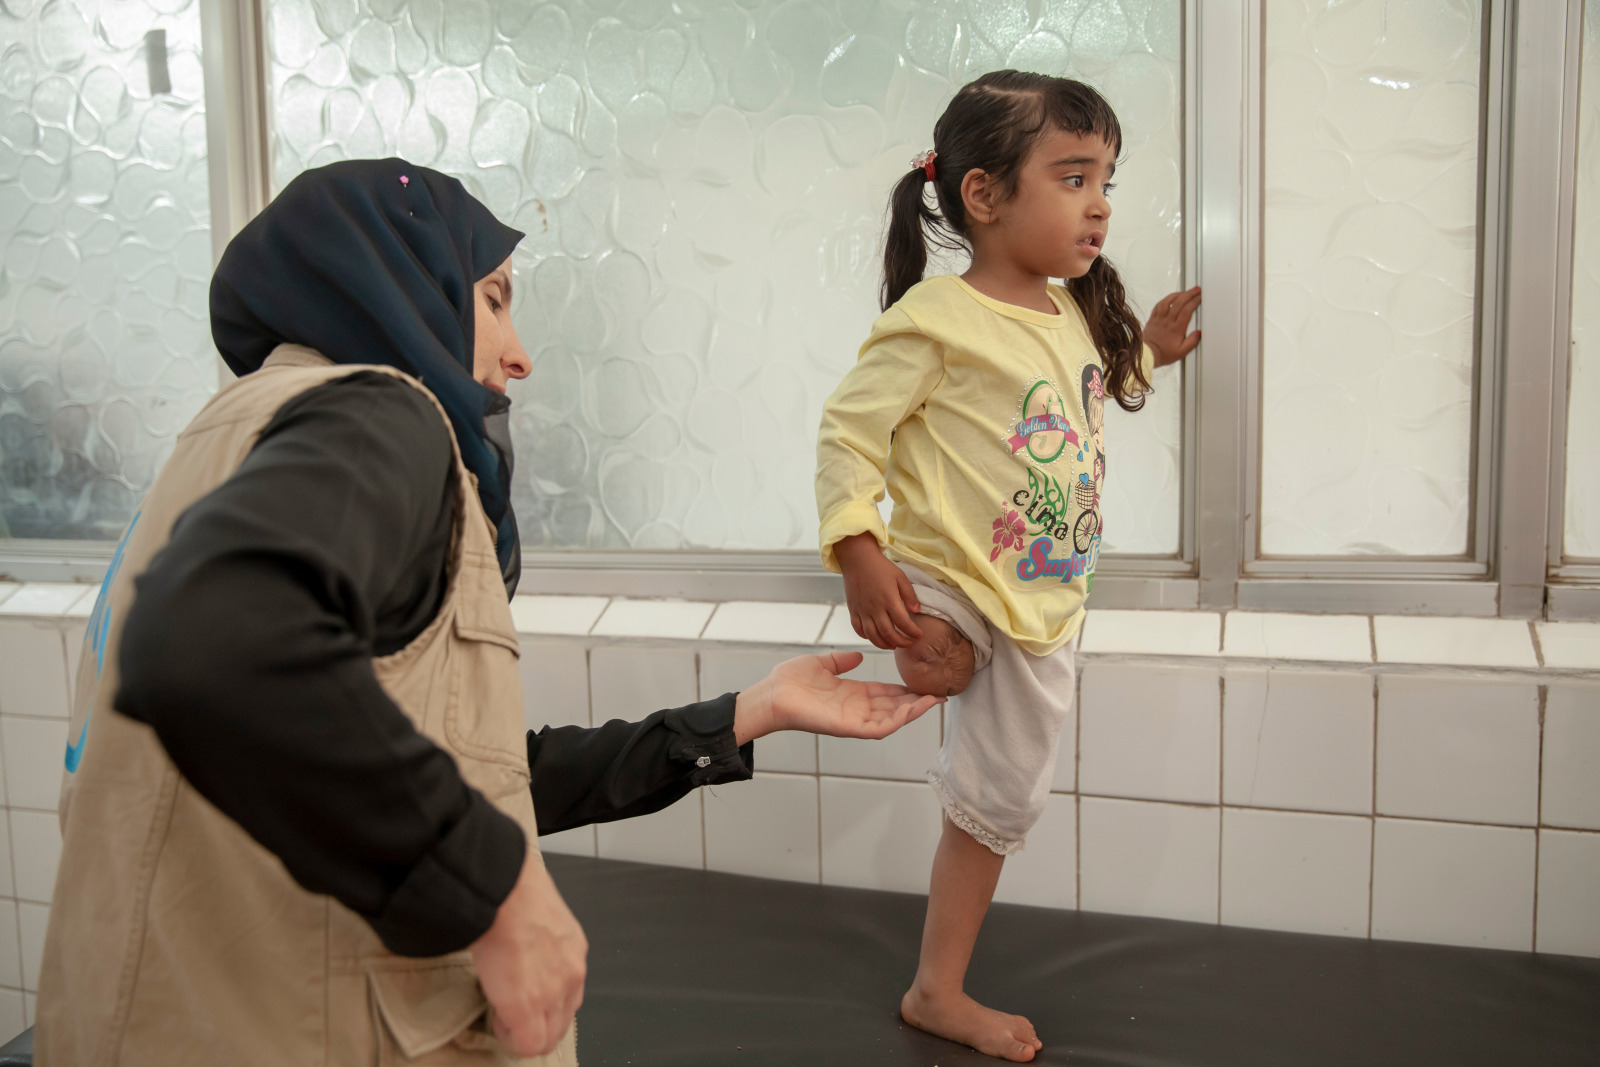 Hala standing on her one leg in a rehabilitation session